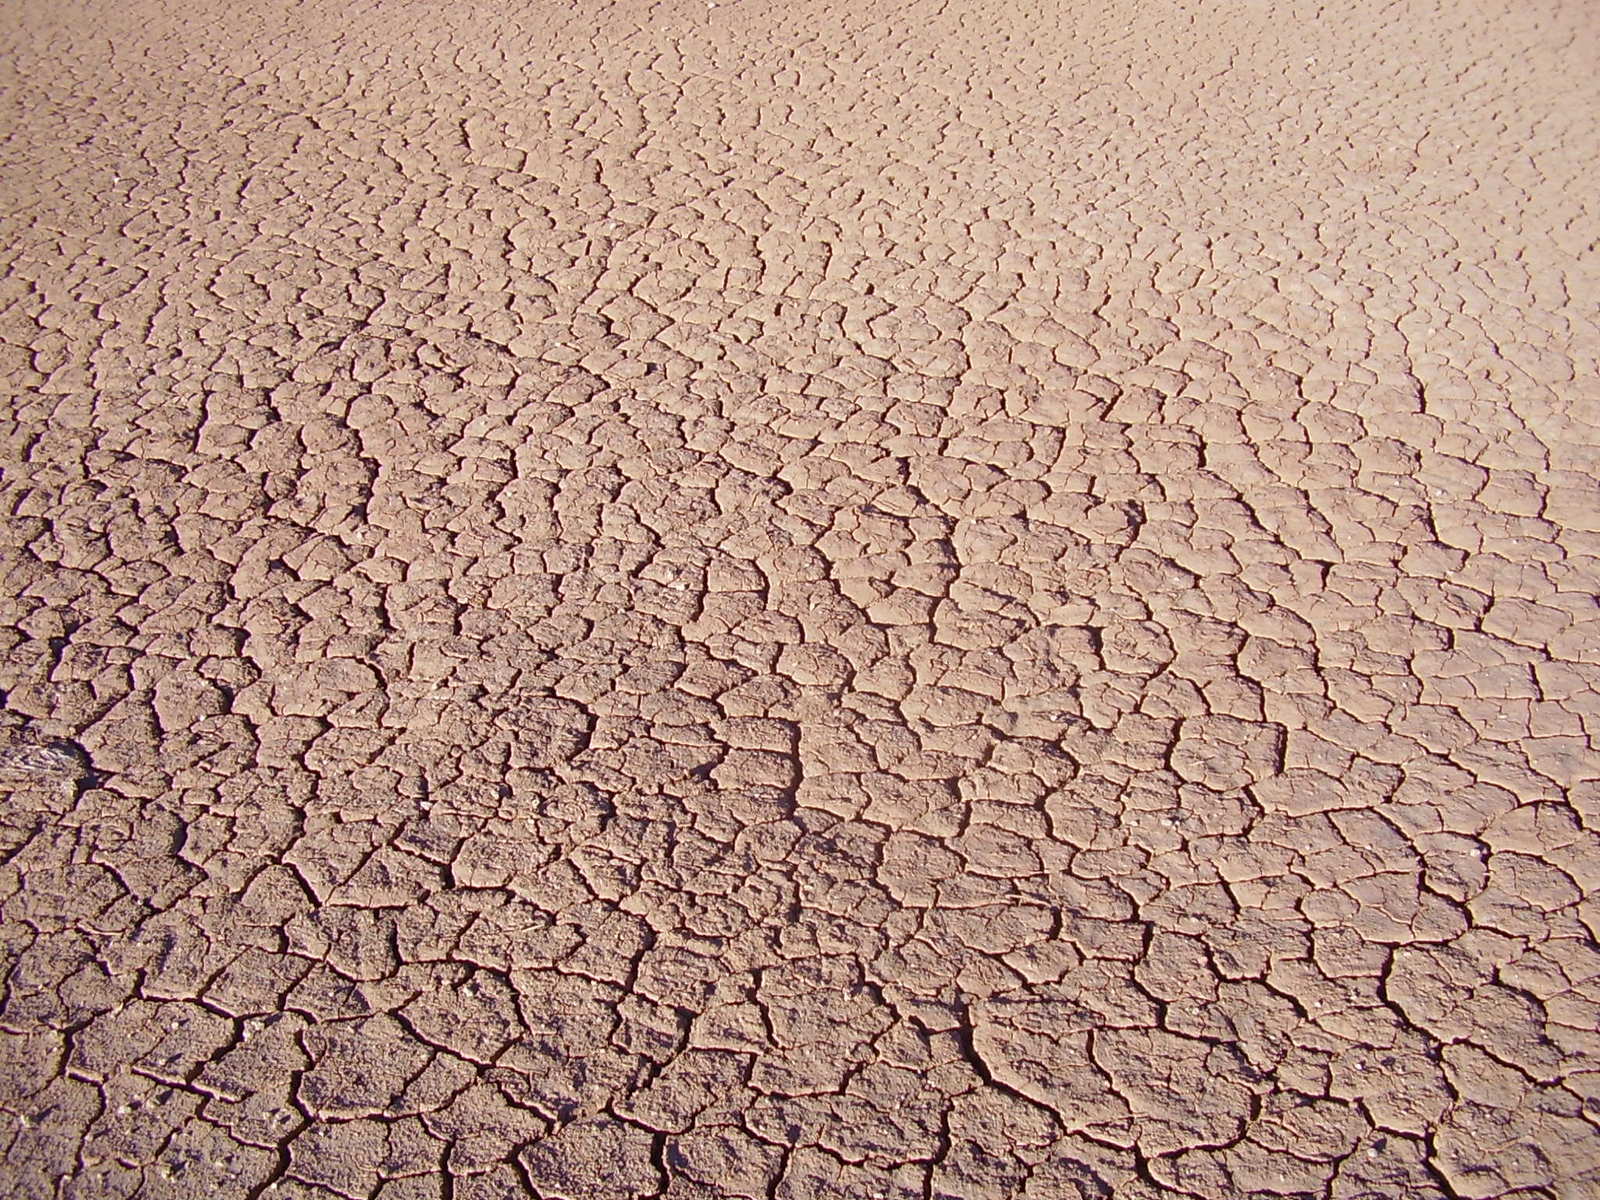 a desert landscape with a very large amount of dry grass